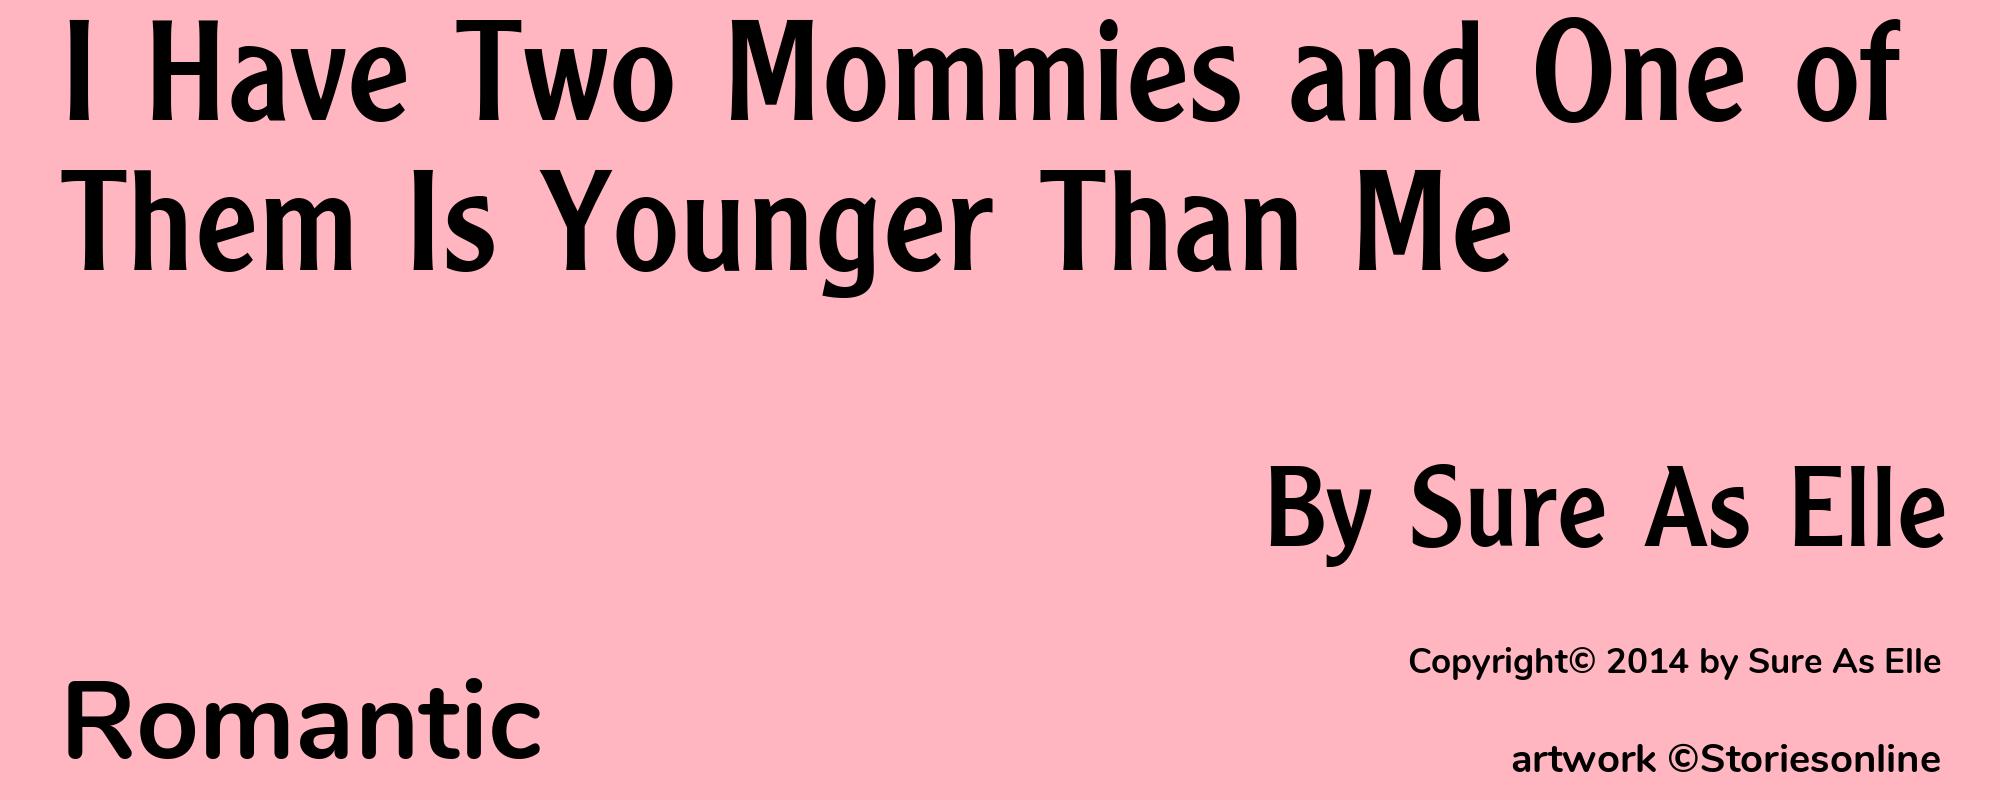 I Have Two Mommies and One of Them Is Younger Than Me - Cover